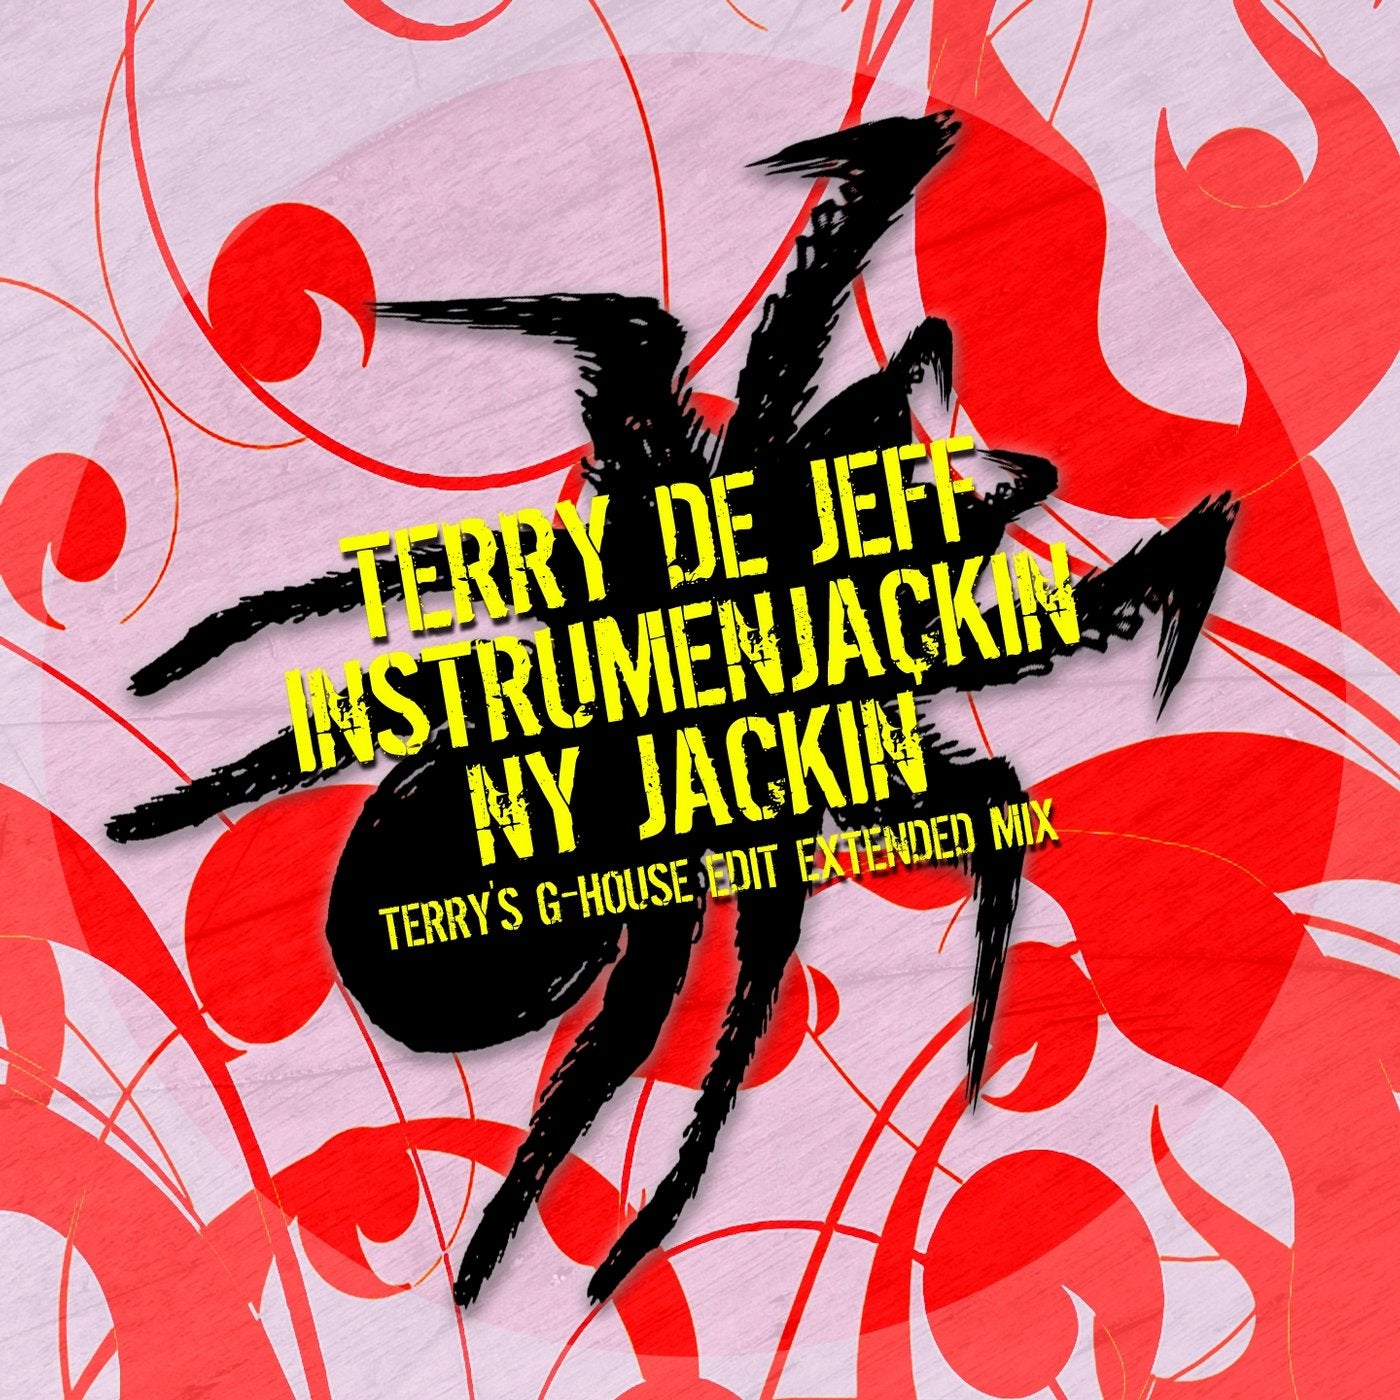 Ny Jackin' (Terry's G-House Edit Extended Mix)